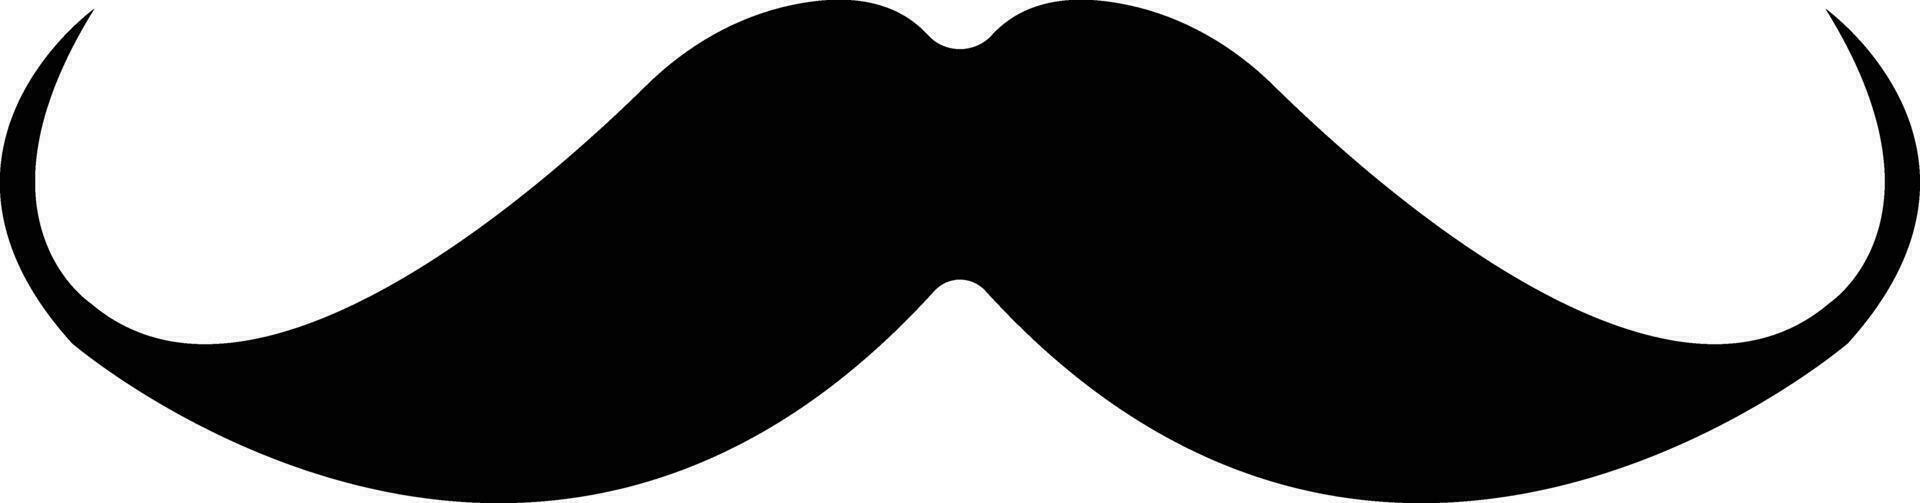 Mustache. Black silhouette of adult man mustaches. Symbol of Father day. Vector illustration. Moustache for men face